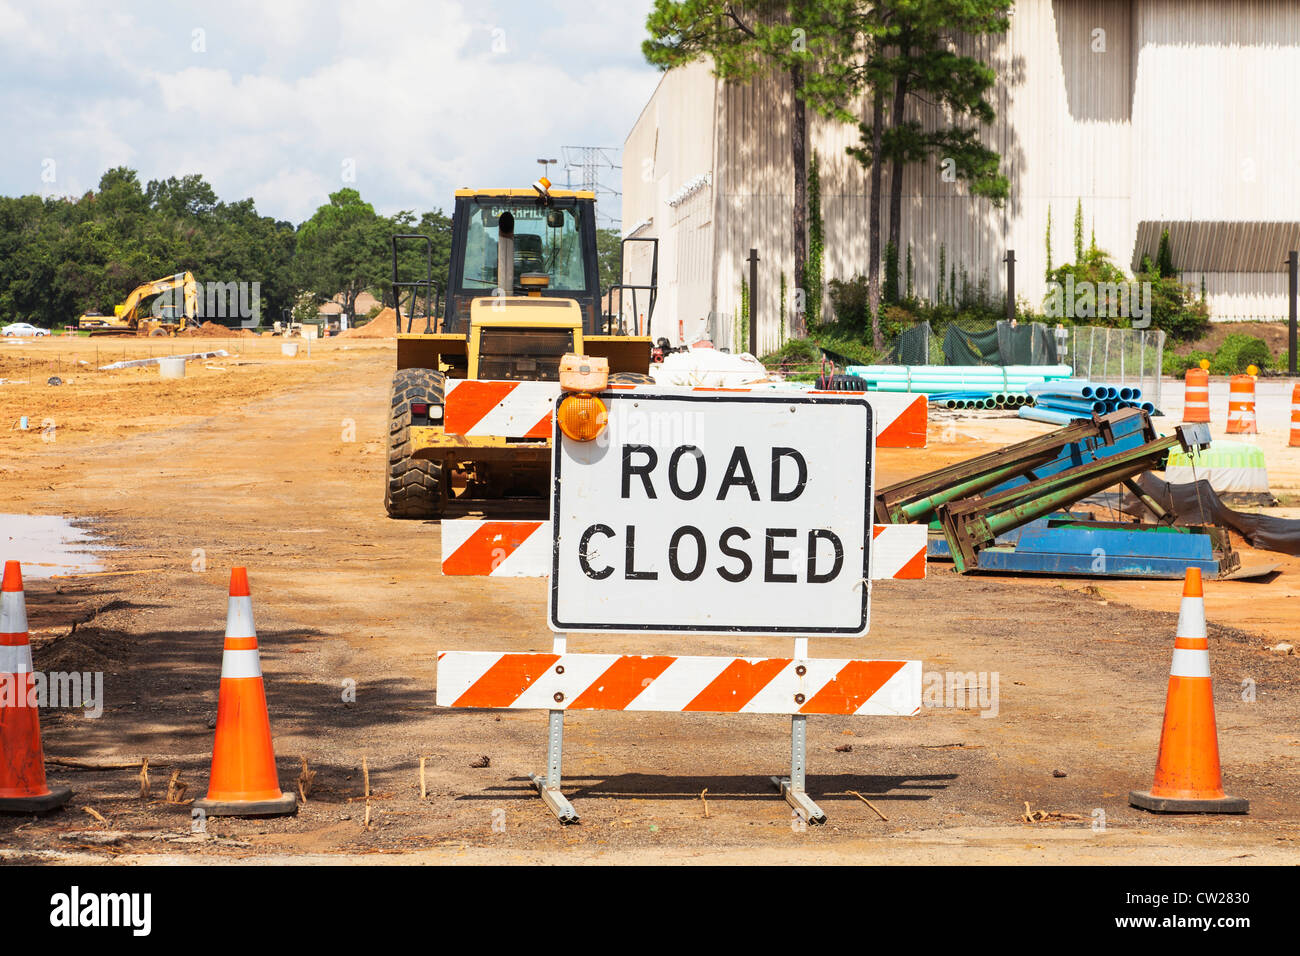 Road closed sign with heavy industrial road building equipment on construction site Stock Photo